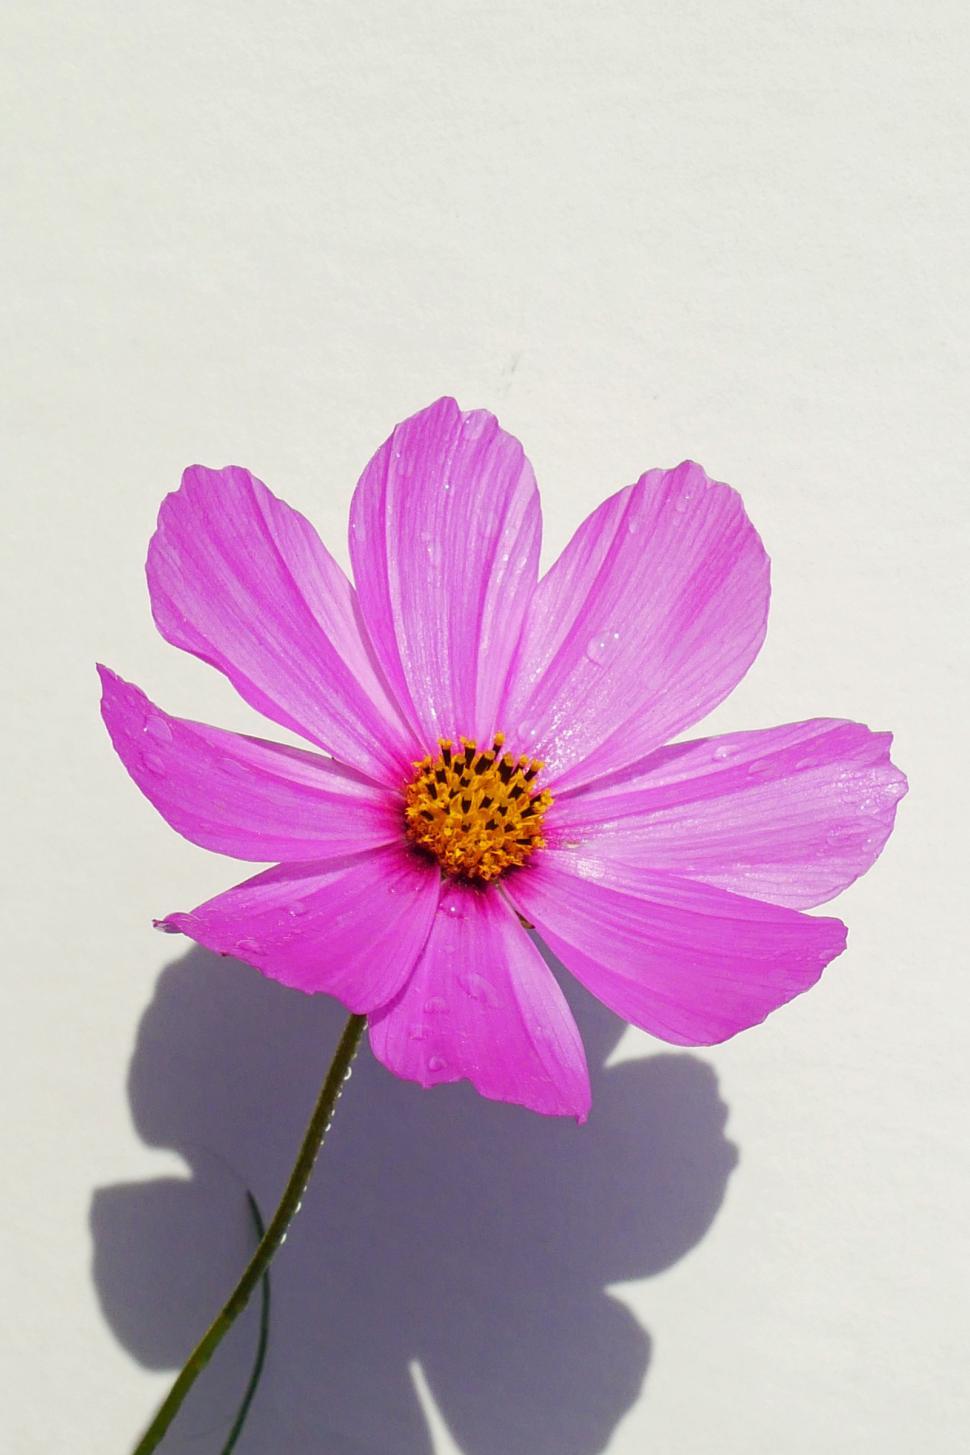 Free Image of Cosmos Flower 